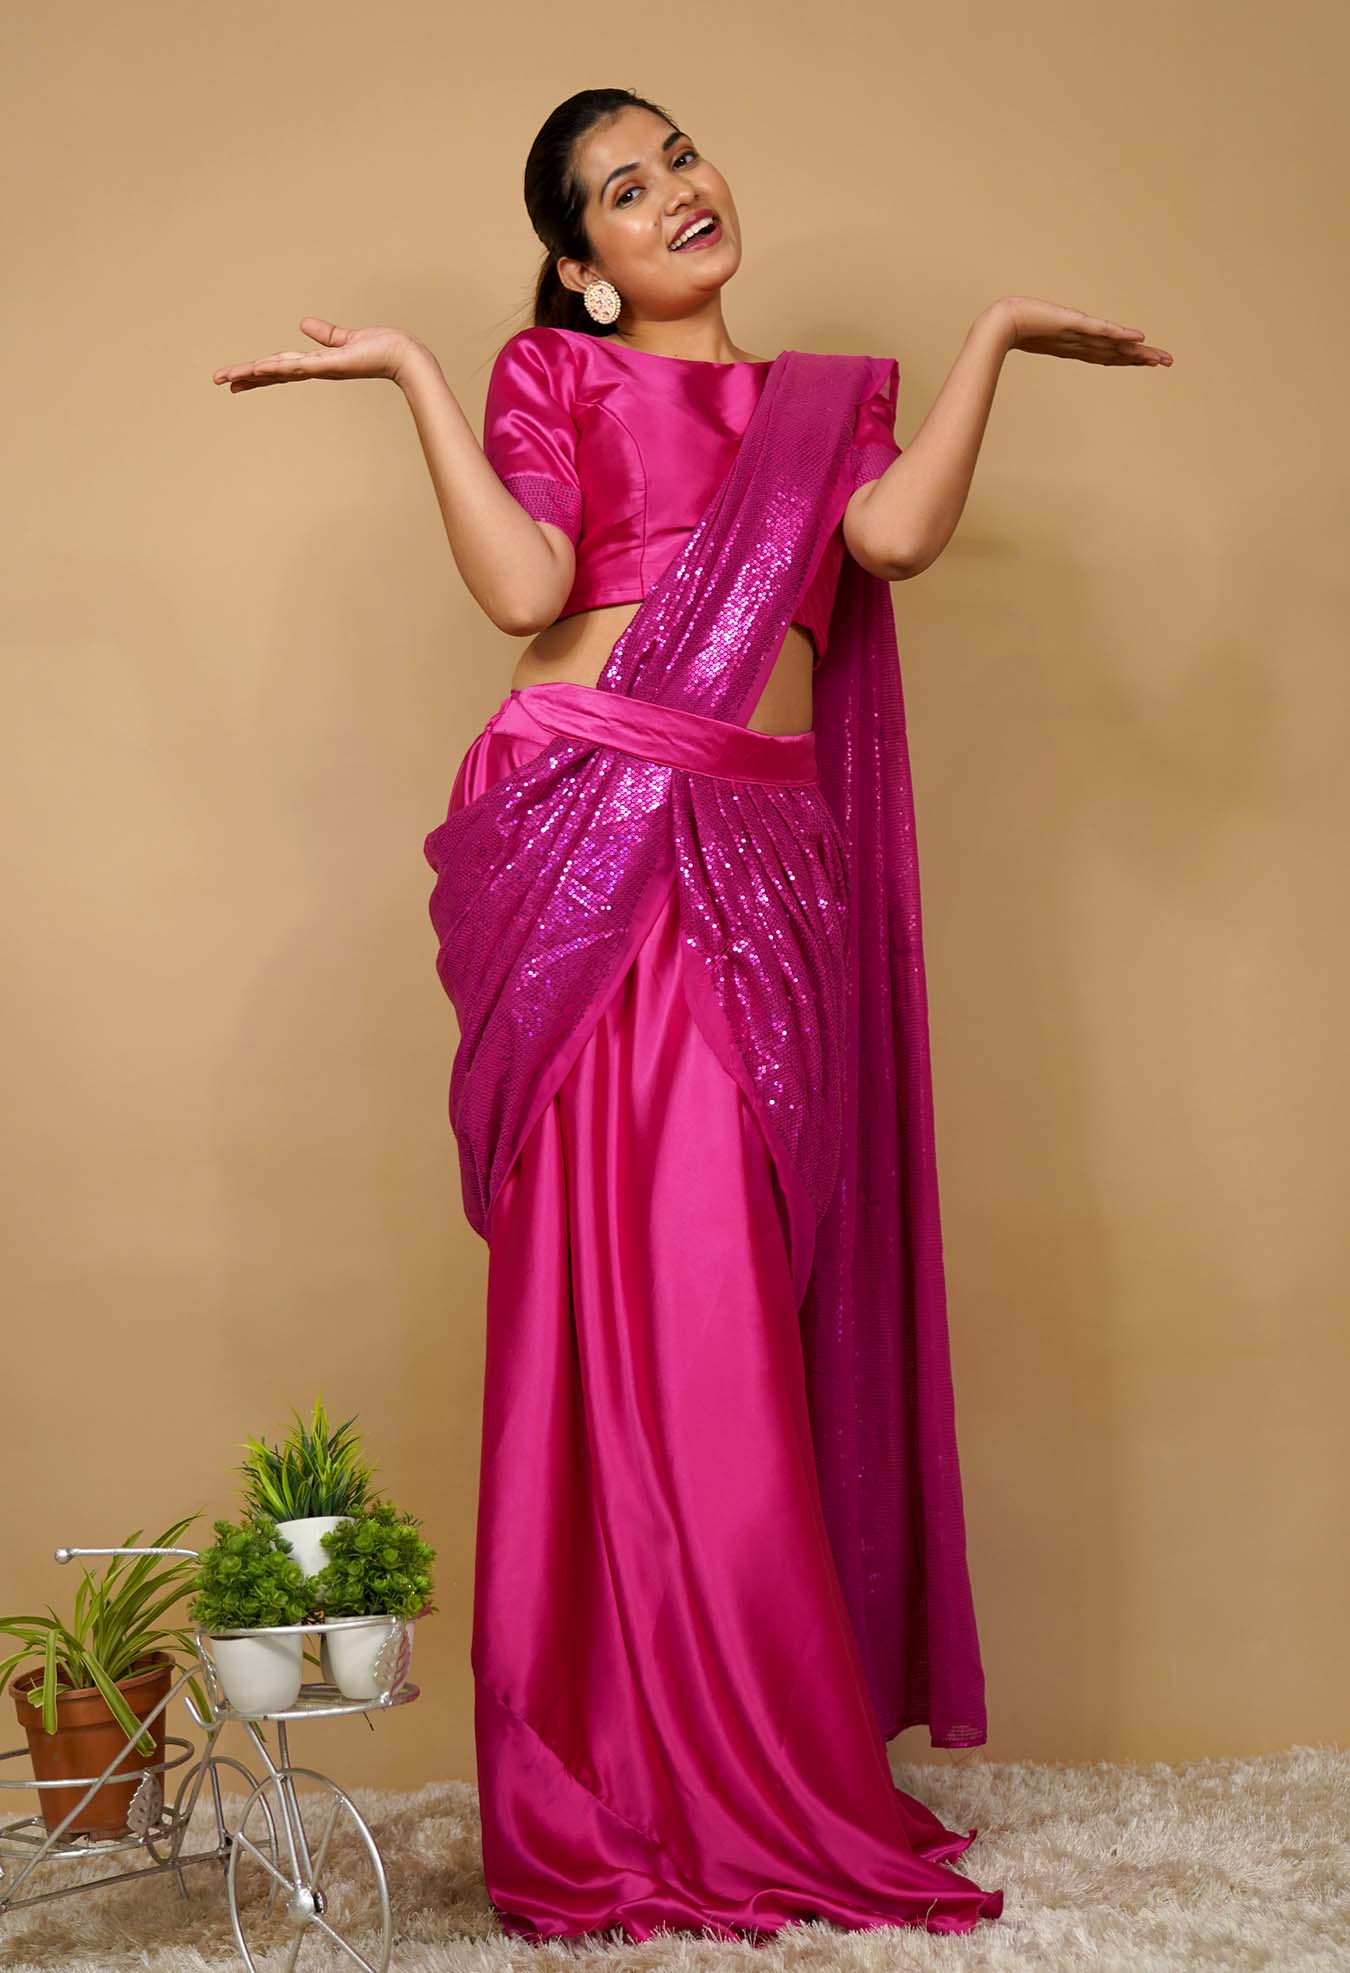 Ready To Wear Cowl Drapped With Belt And skirt patterned Designer Saree